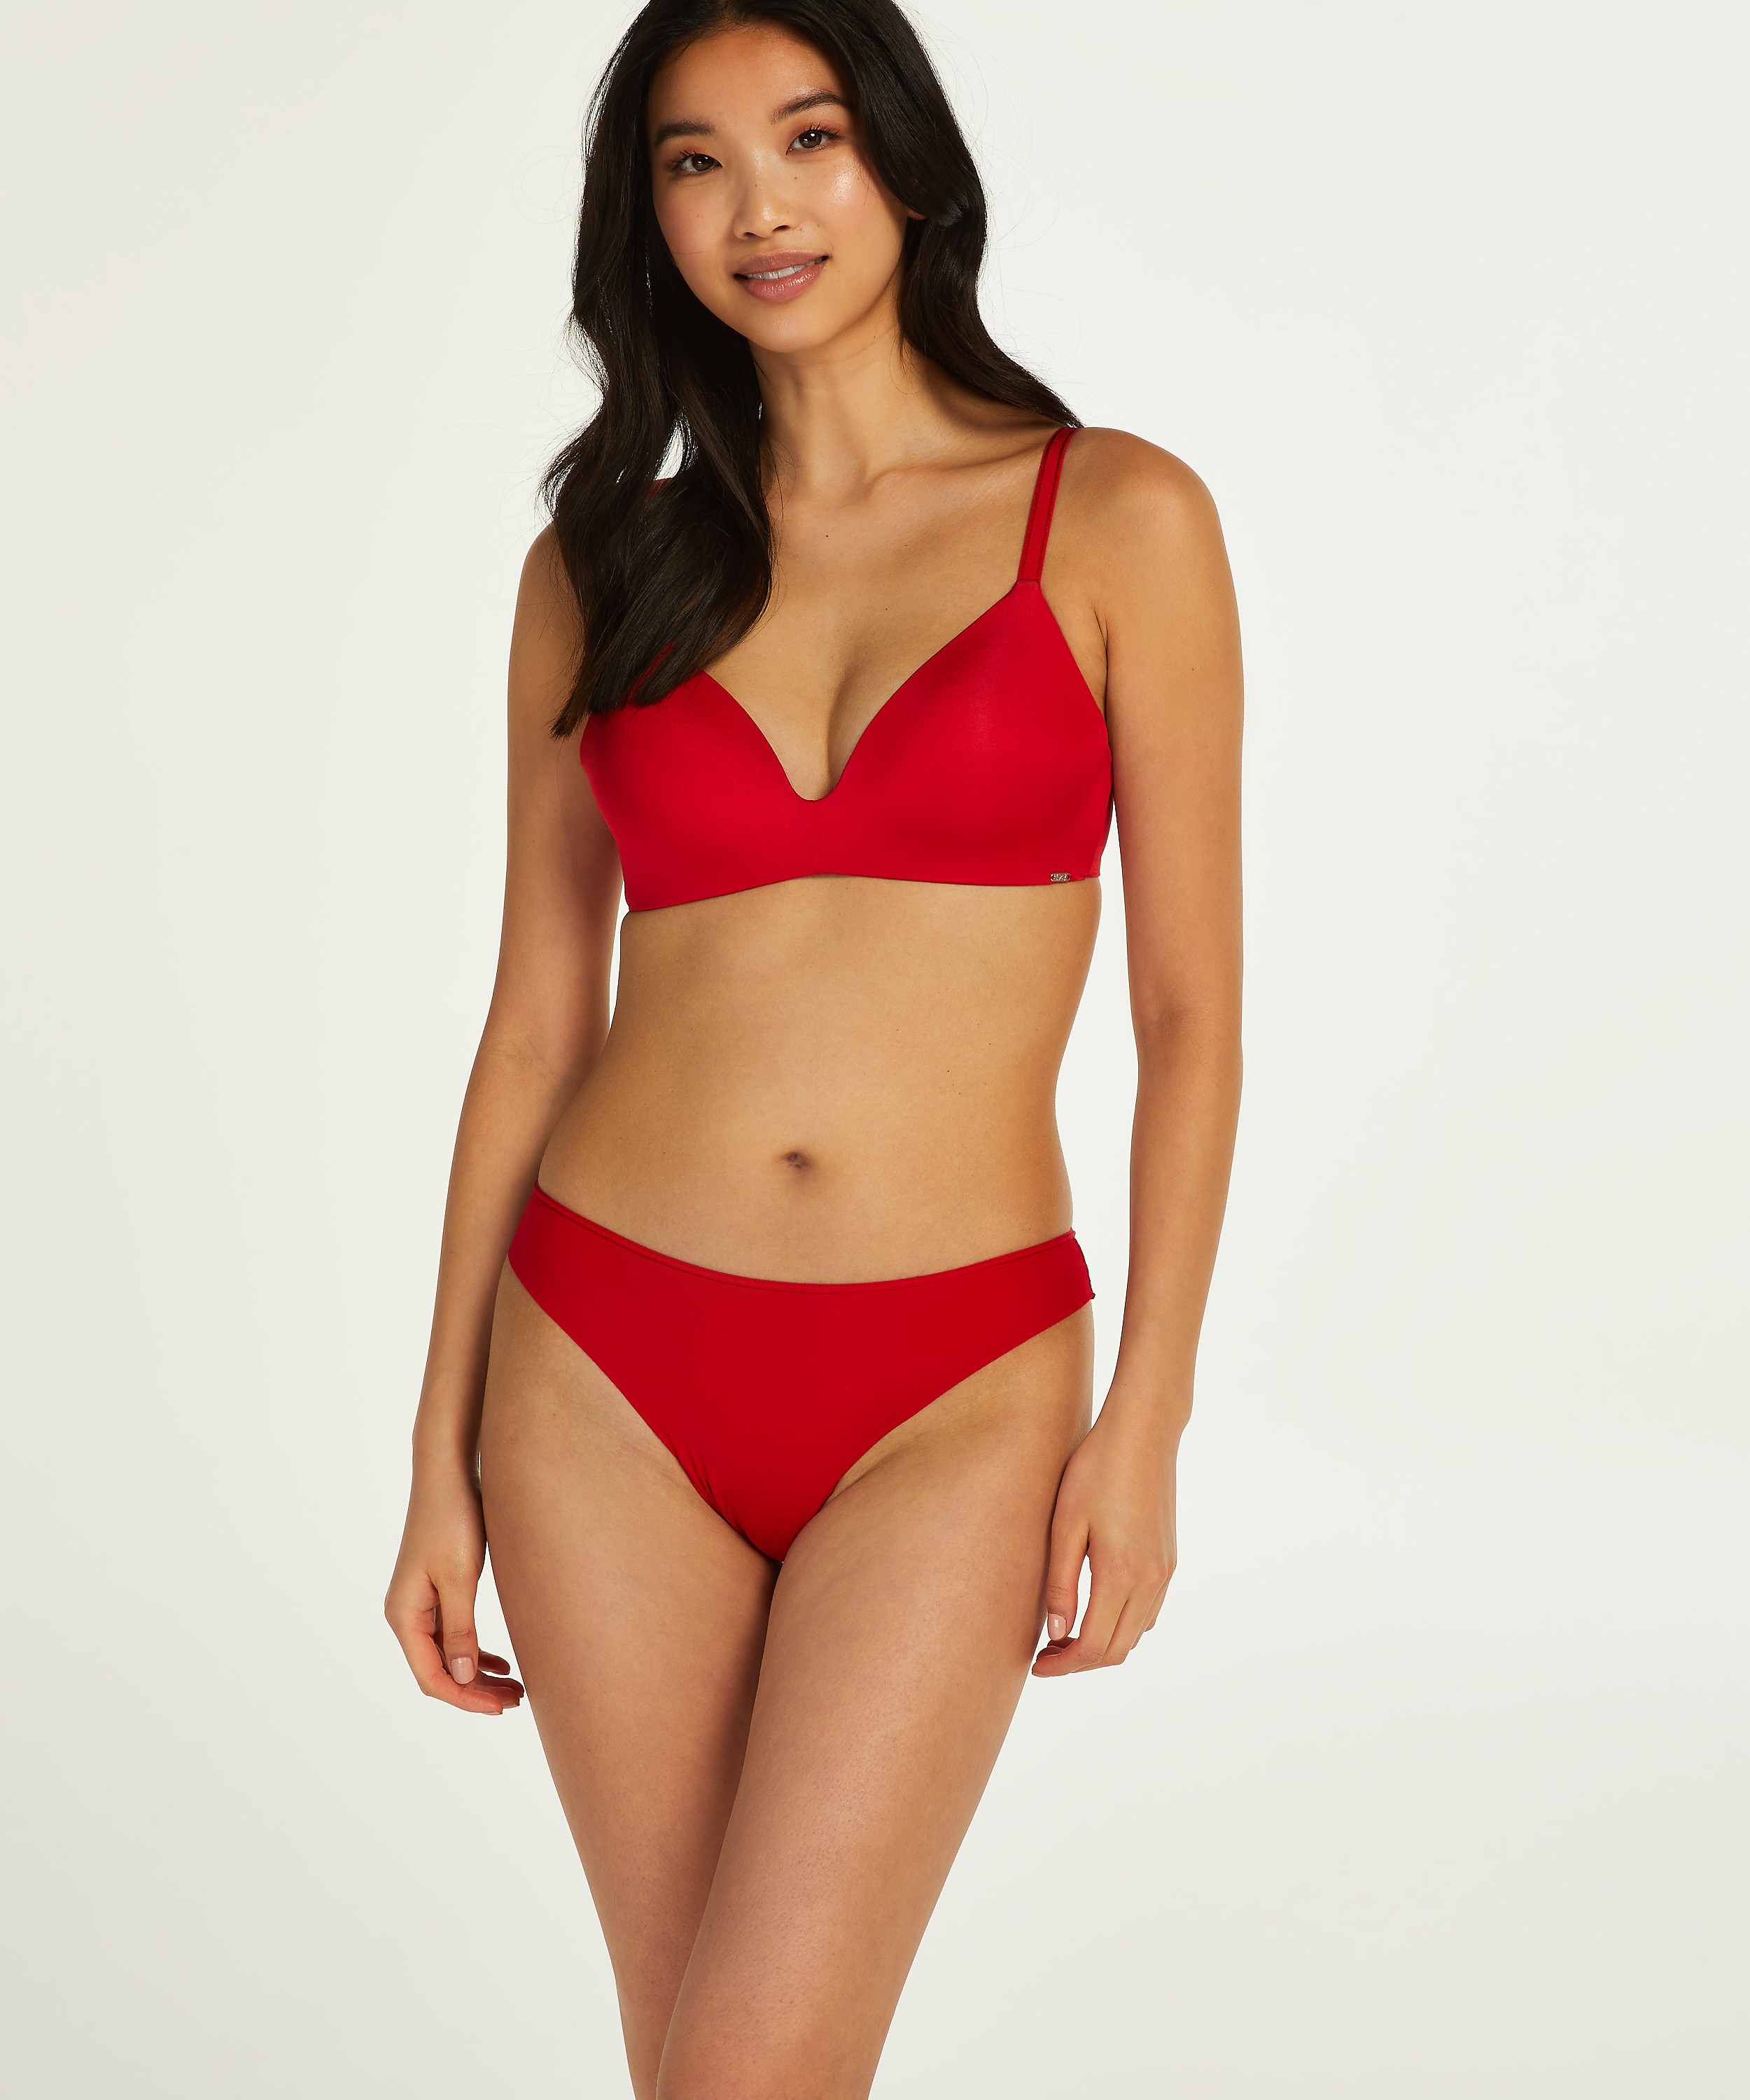 High-cut invisible thong for €8.99 - Thongs - Hunkemöller